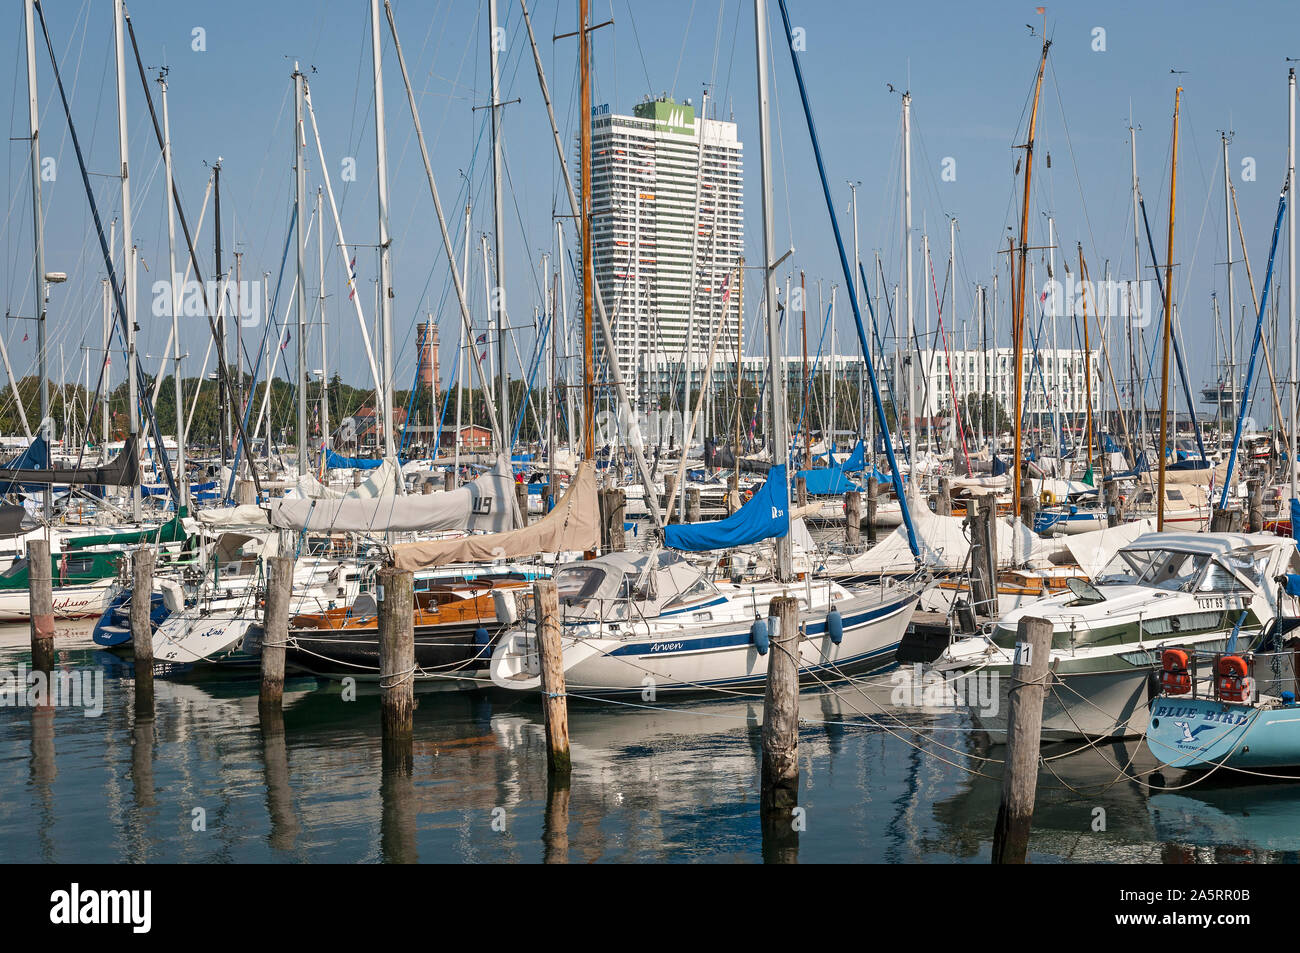 Yachts moored in Priwall Harbour, Travemünde, Luebeck, Germany. Stock Photo